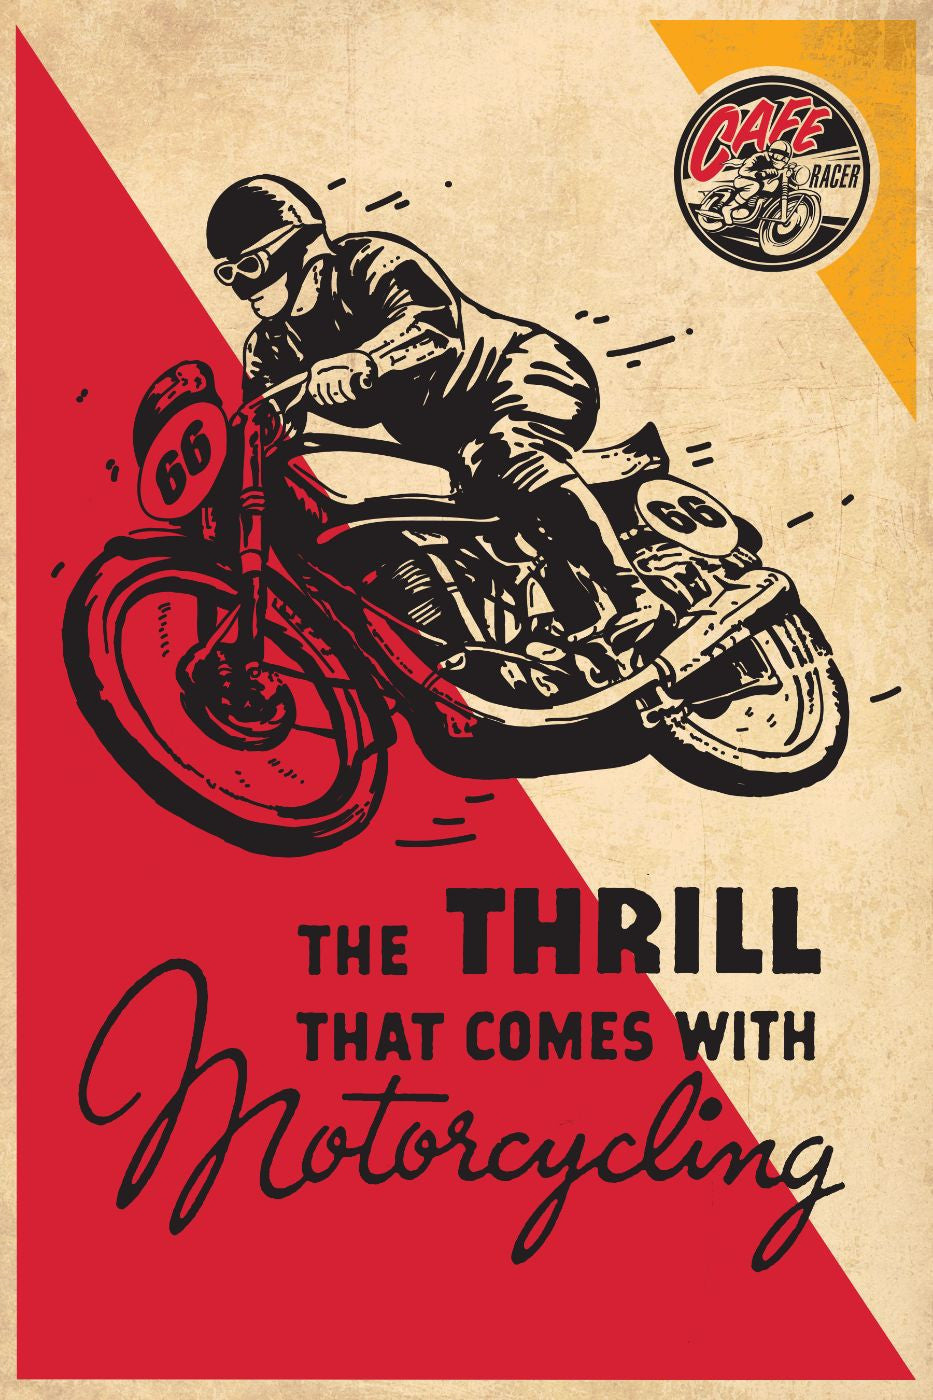 Vintage Poster - Thrill Of Motorcycling - Framed Prints by Sherly David, Buy Posters, Frames, Canvas & Digital Art Prints